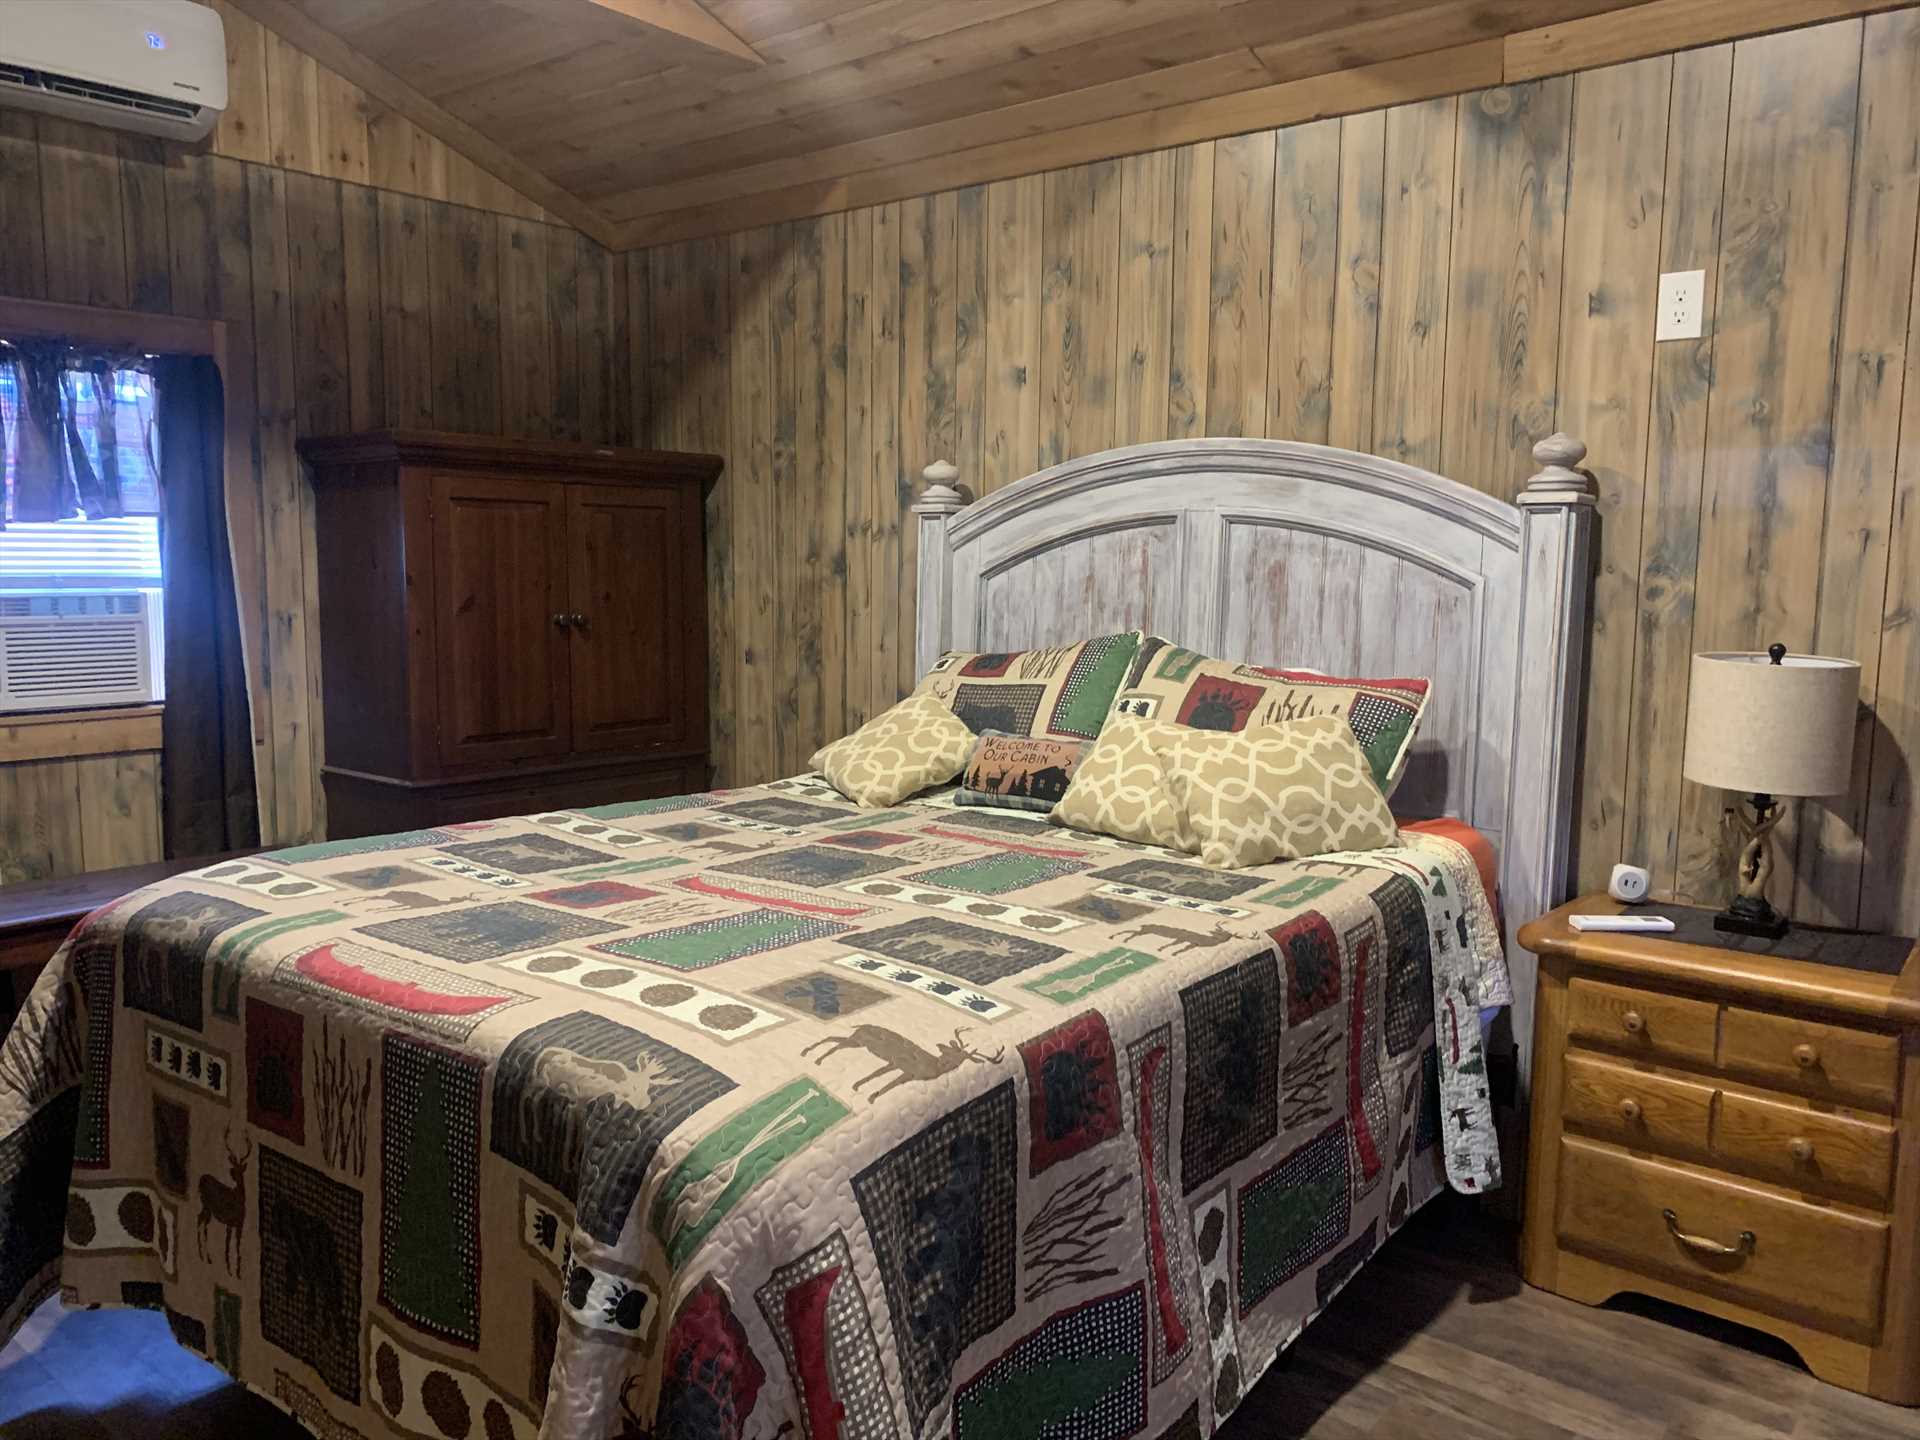                                                 The cabin's bedroom features an enormous and comfortable king-sized bed, and all bed linens are included as part of your stay.